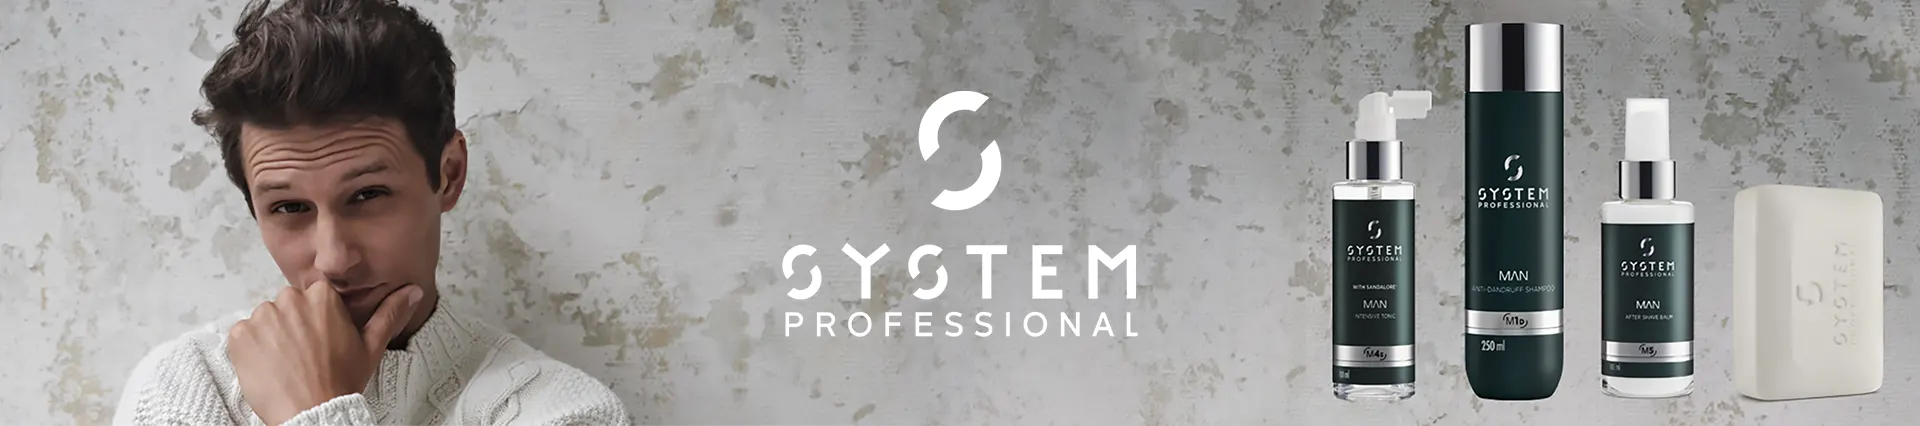 System professional H